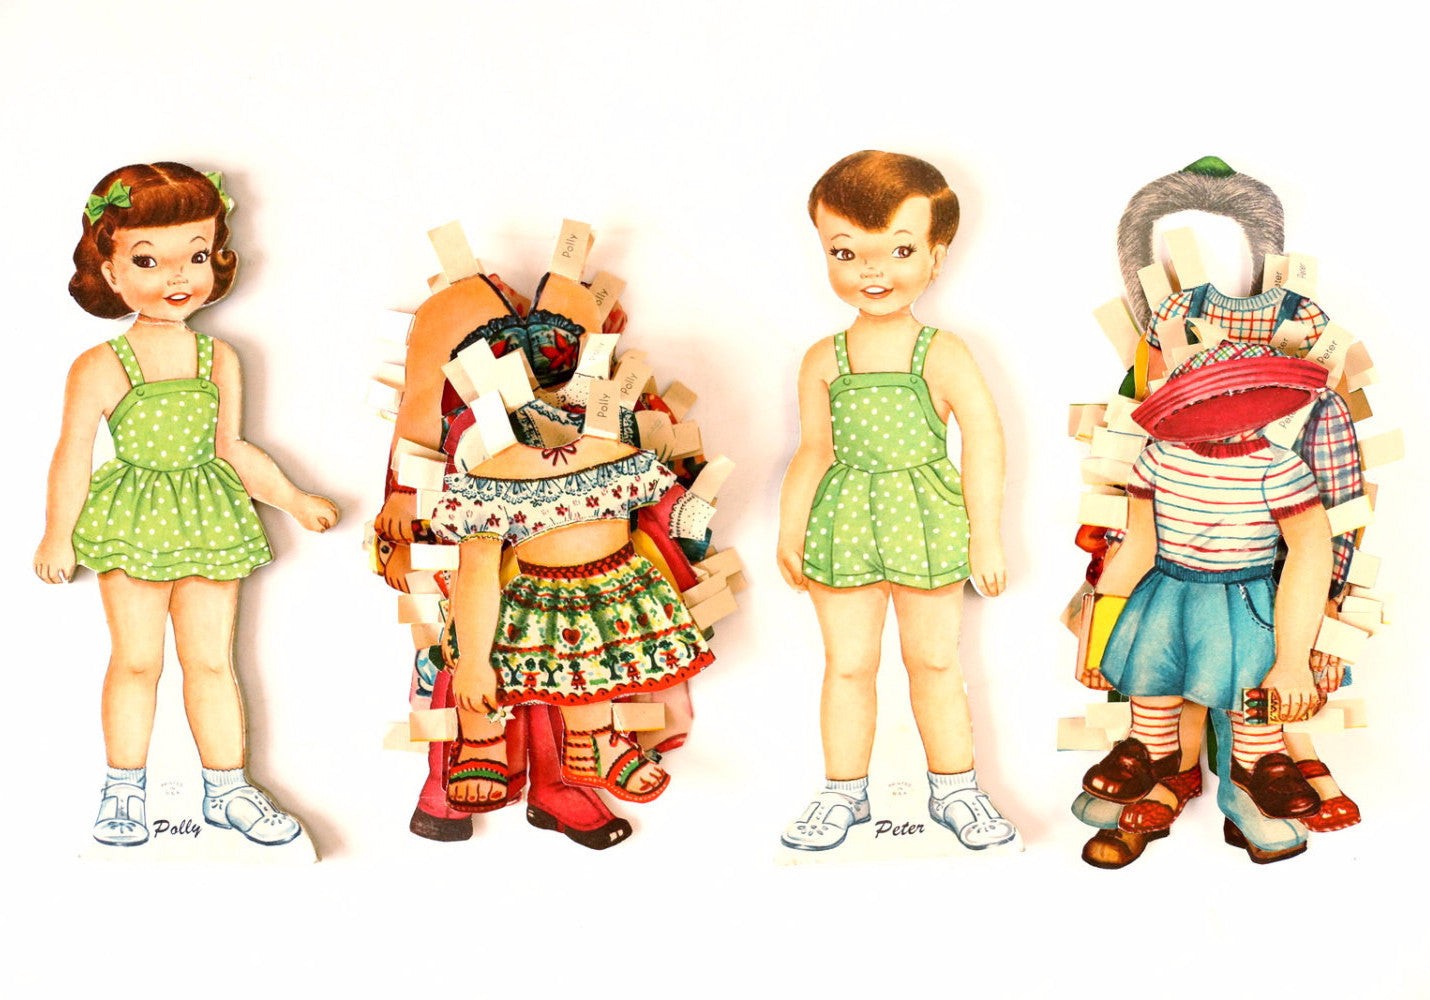 Vintage Paper Doll Polly and Peter with Clothing (c.1950s) –